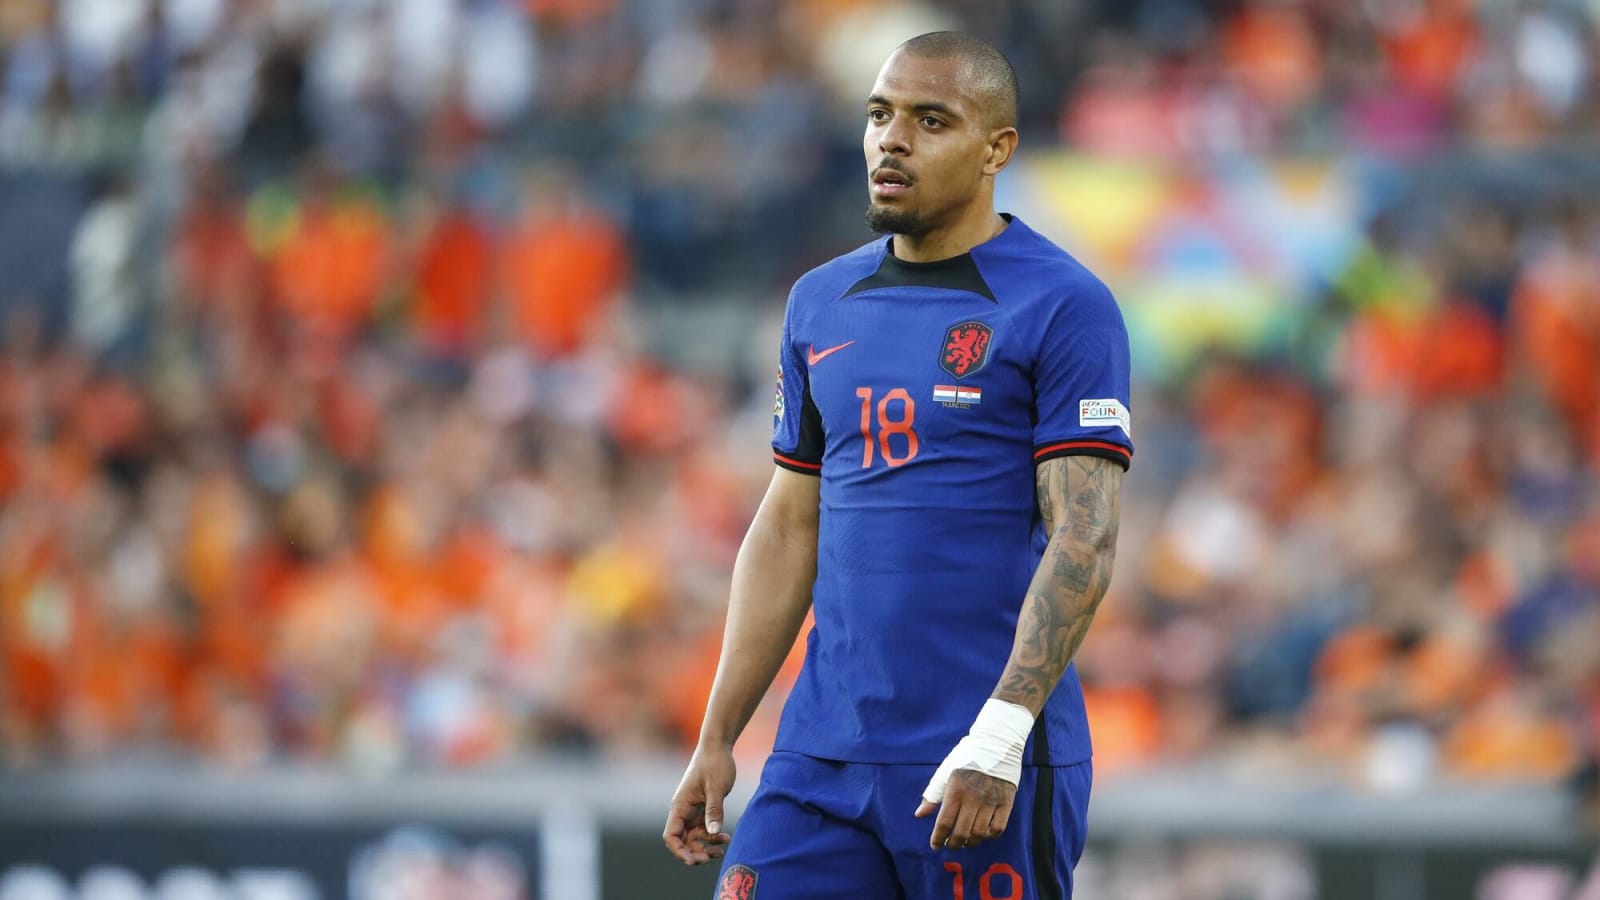 Watch: Donyell Malen puts Netherlands ahead in Nations League semi-final with tidy finish